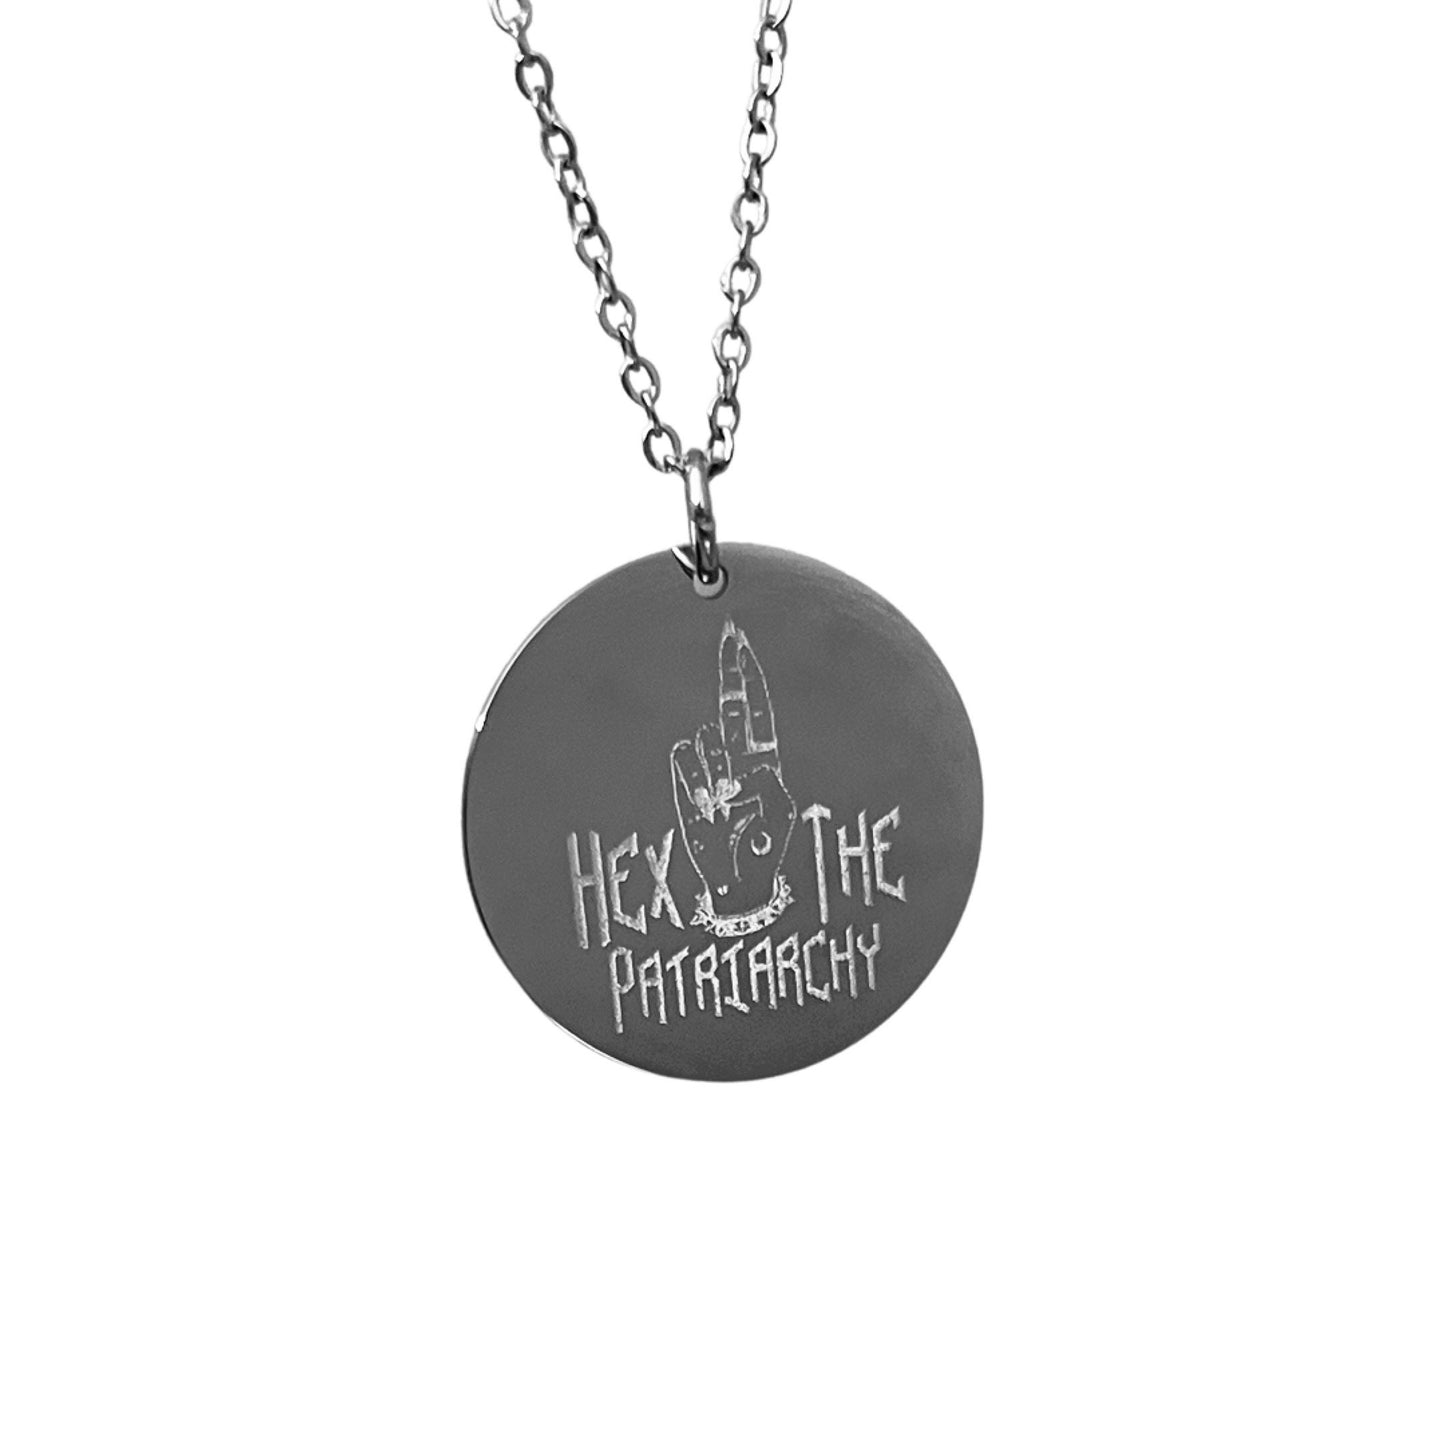 Hex the Patriarchy necklace